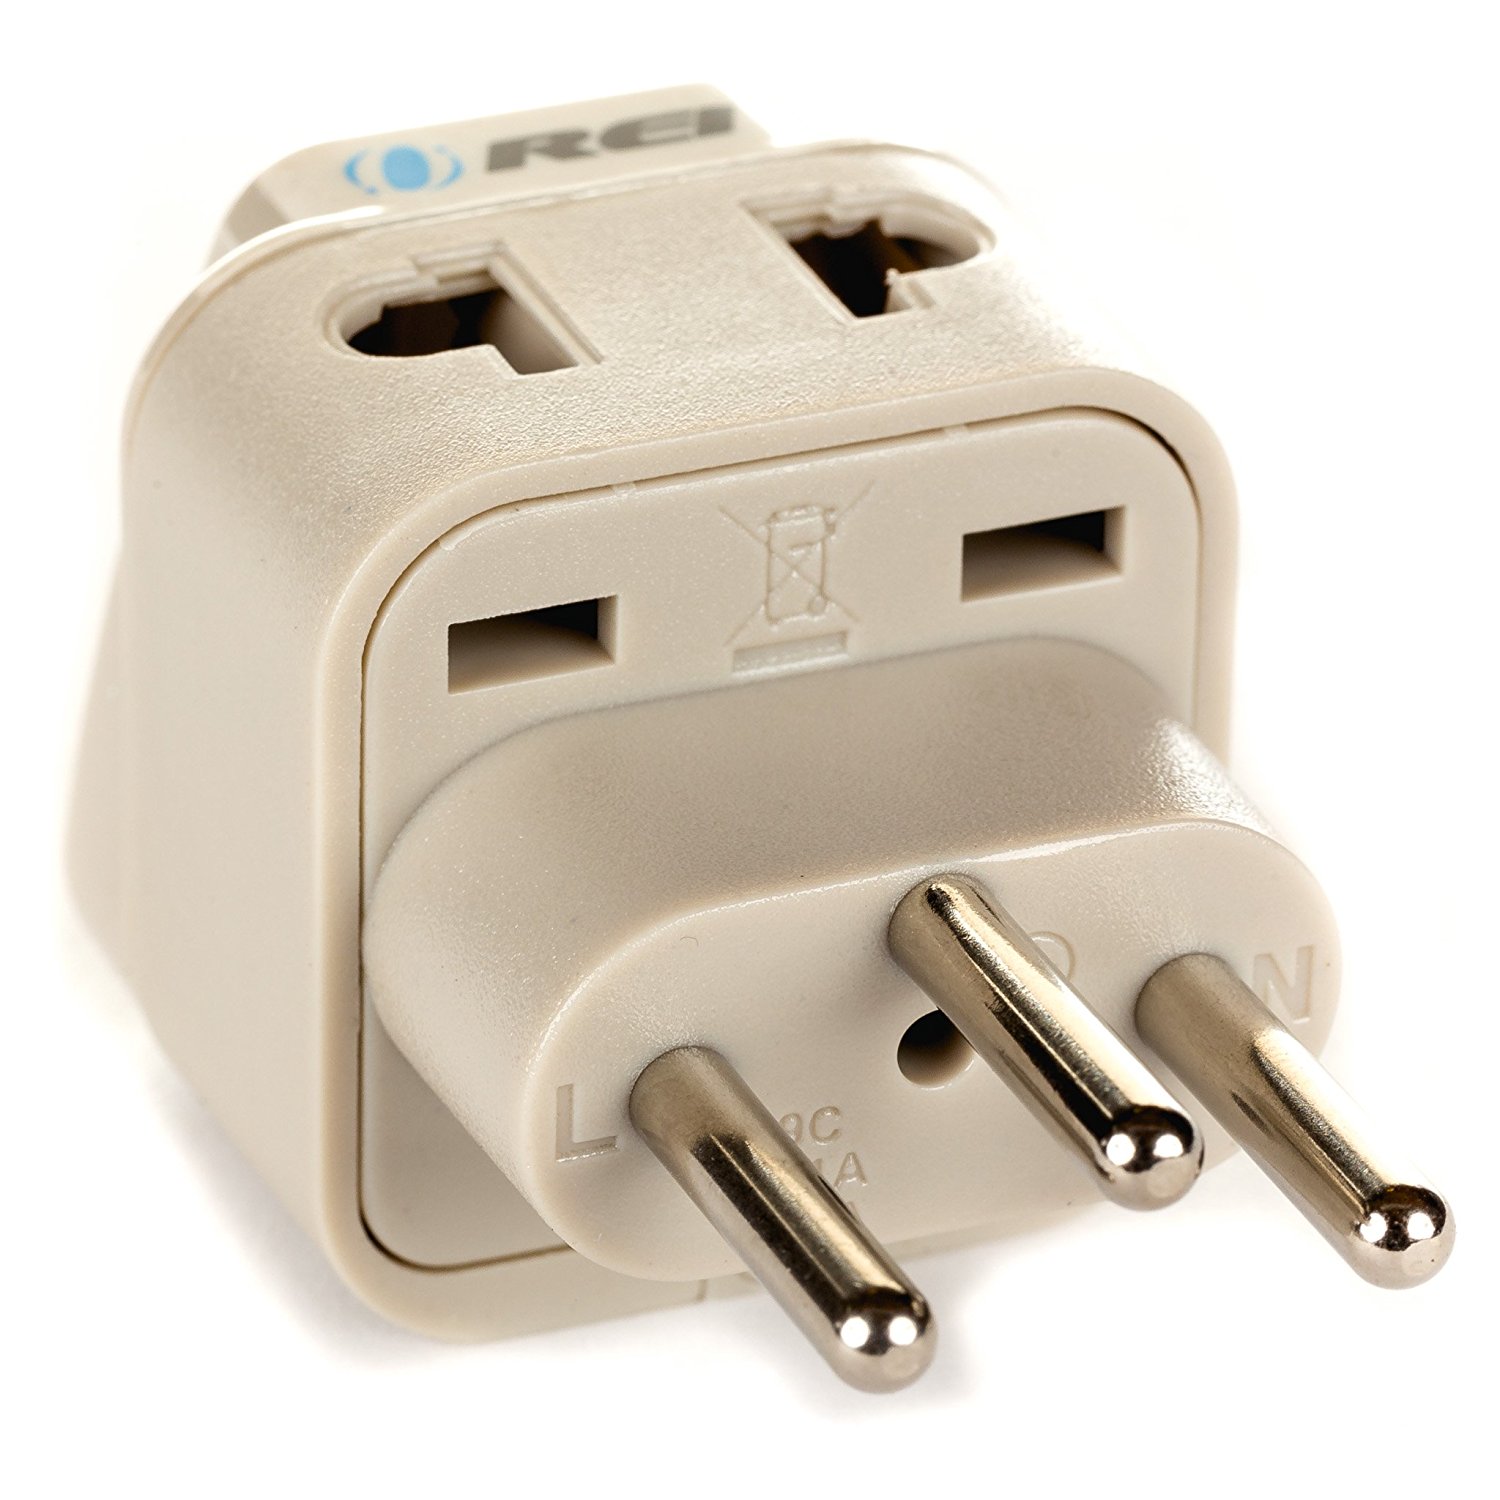 Amazon.com: OREI Grounded Universal 2 in 1 Plug Adapter Type J for ...